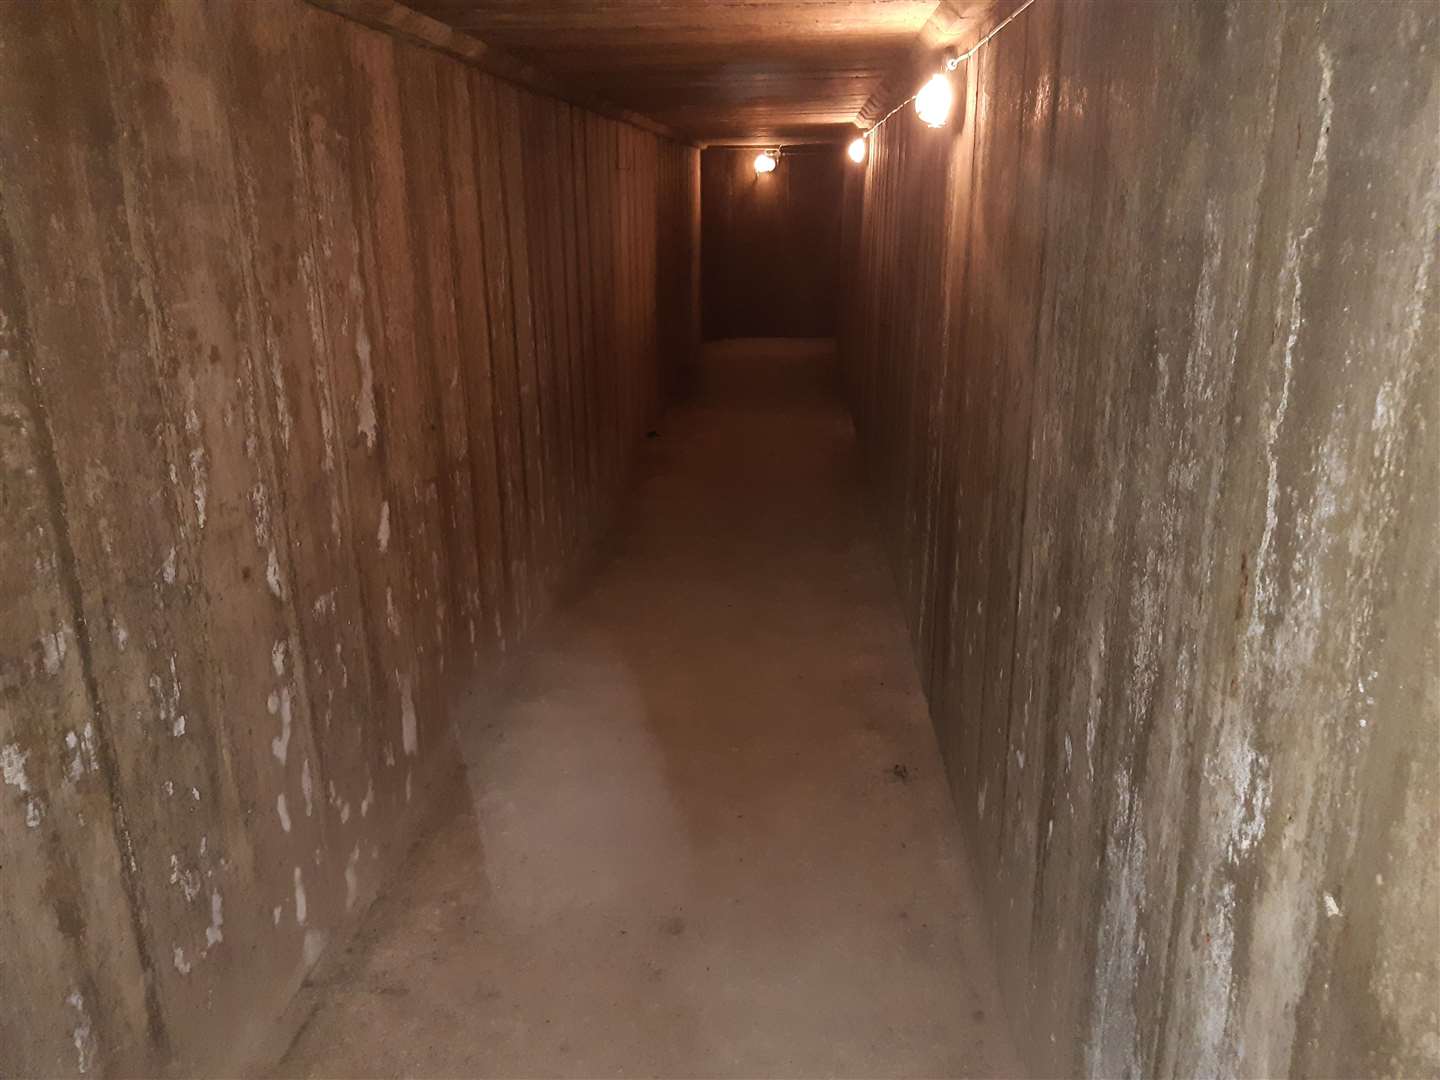 One of the tunnels